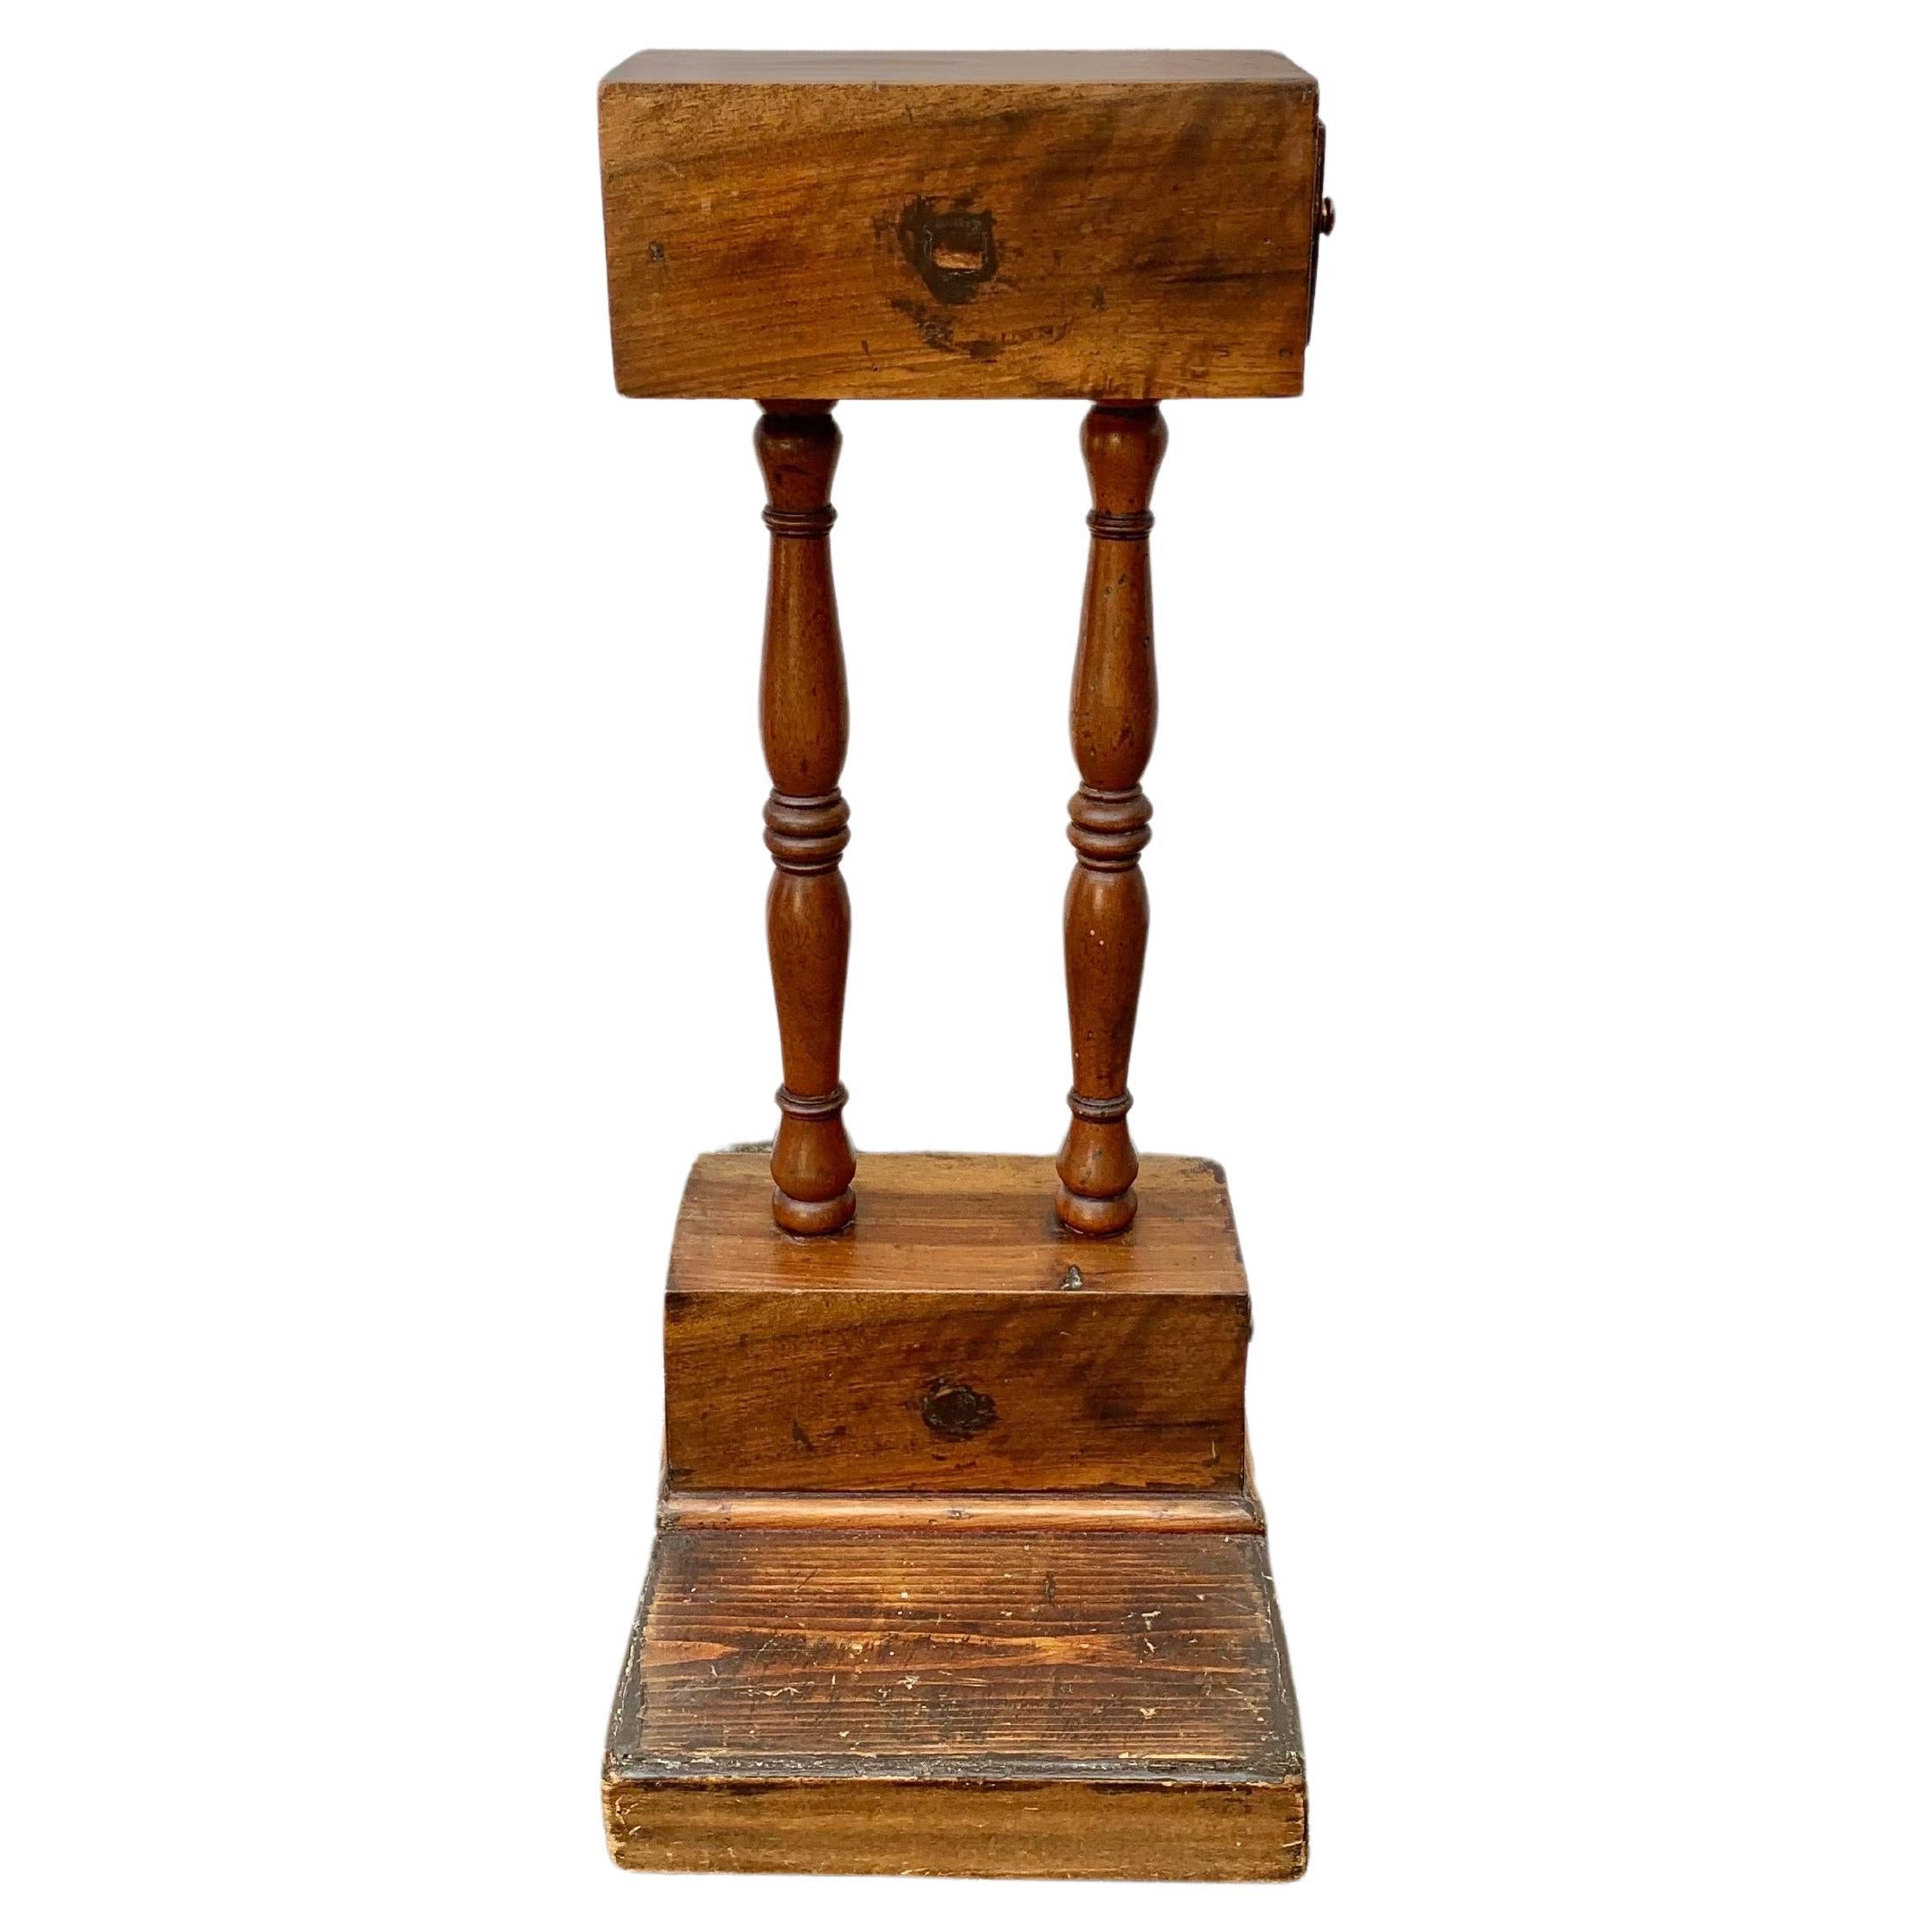 This one of a kind Late 19th Century Tobacco Stand was handcrafted in the 1800's from Walnut and Pine. The piece features a rectangular box style top consisting of a small drawer that is supported by hand turned supports adjoined to another